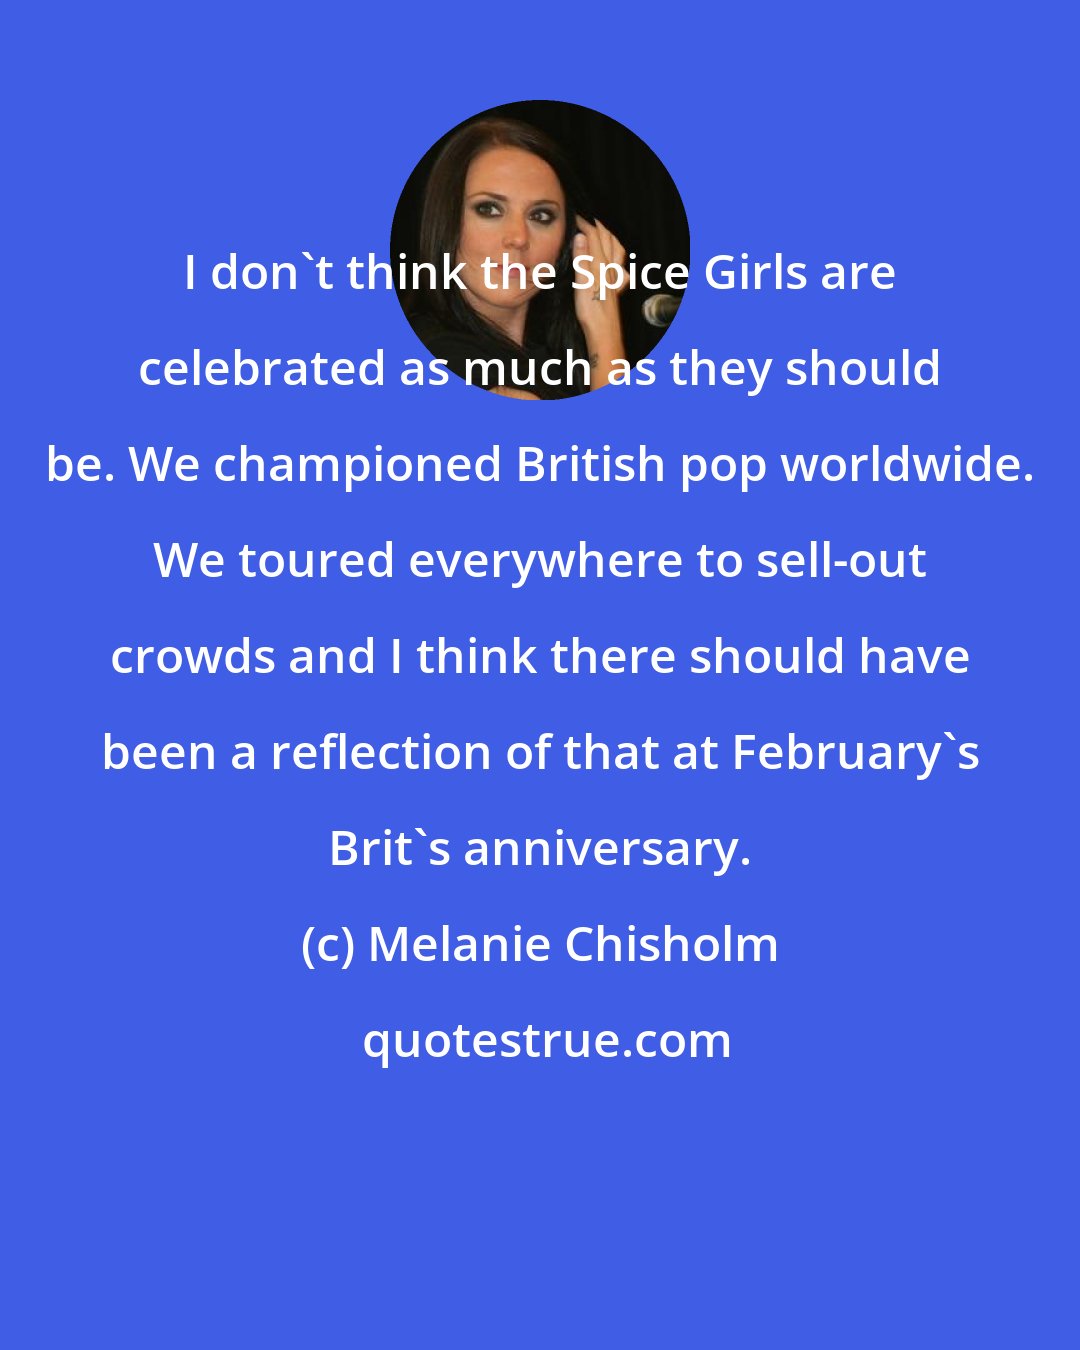 Melanie Chisholm: I don't think the Spice Girls are celebrated as much as they should be. We championed British pop worldwide. We toured everywhere to sell-out crowds and I think there should have been a reflection of that at February's Brit's anniversary.